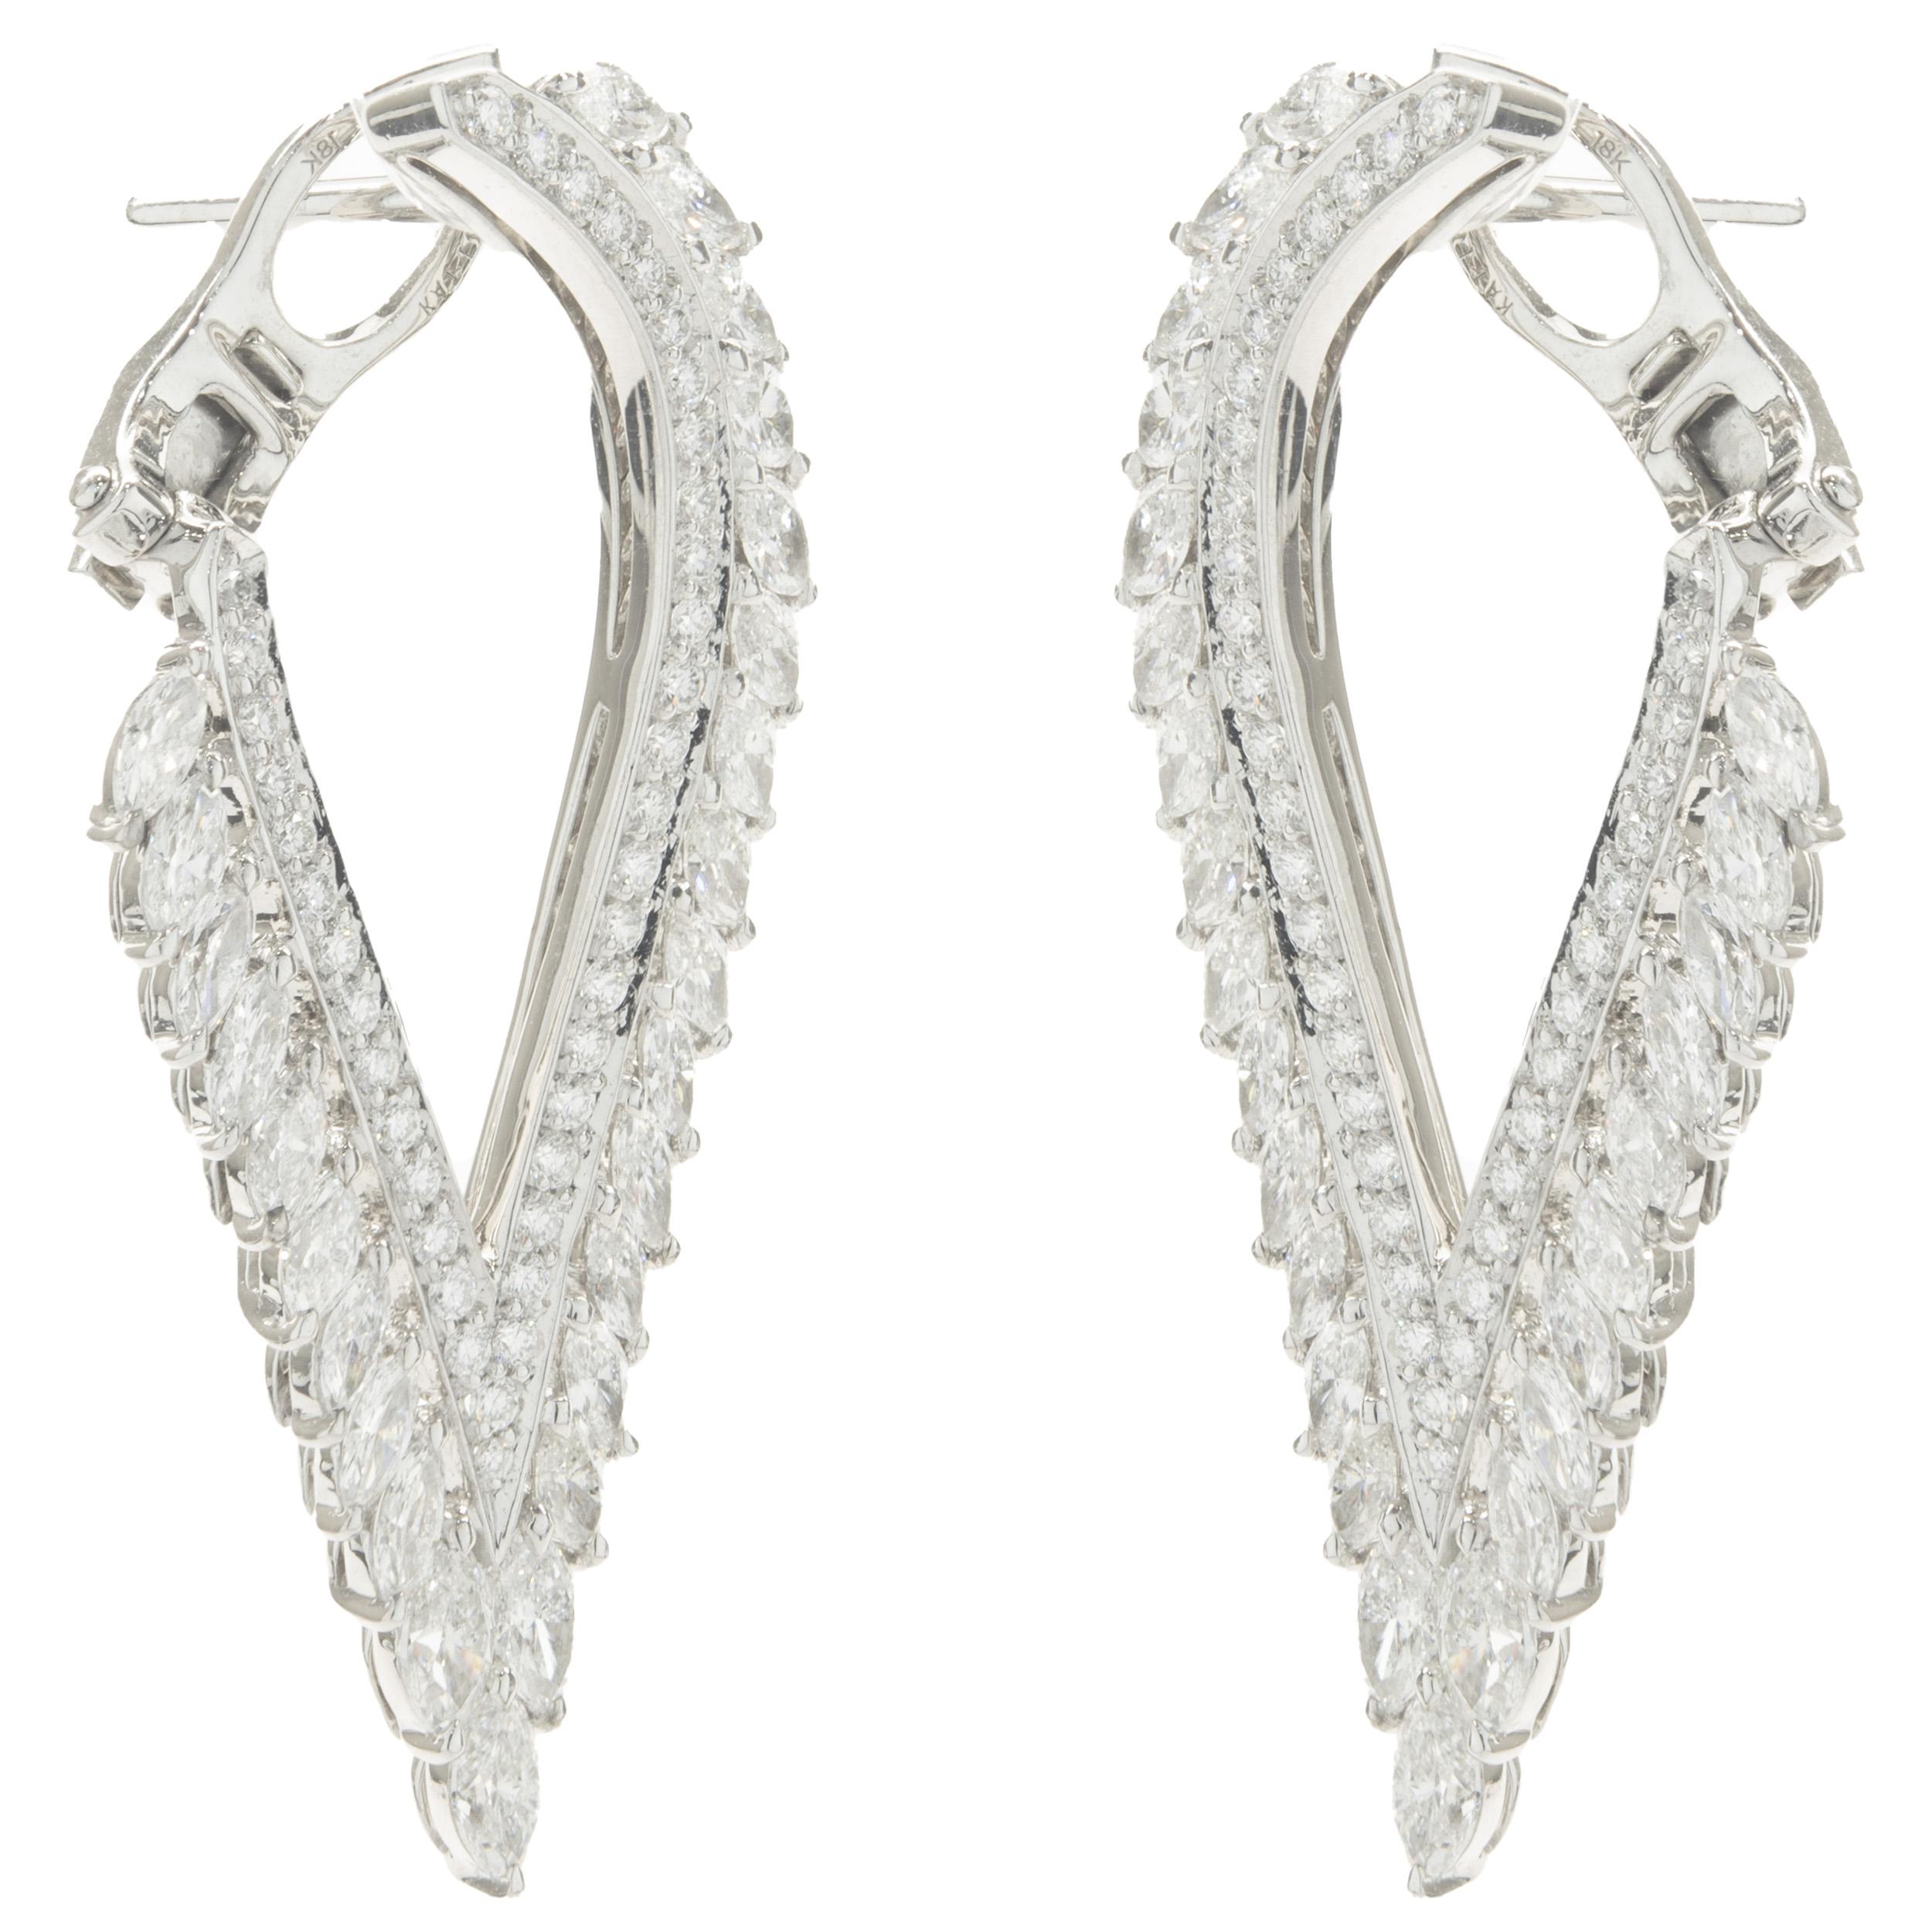 Kat Florence 18 Karat White Gold Diamond Wing Earrings In Excellent Condition For Sale In Scottsdale, AZ